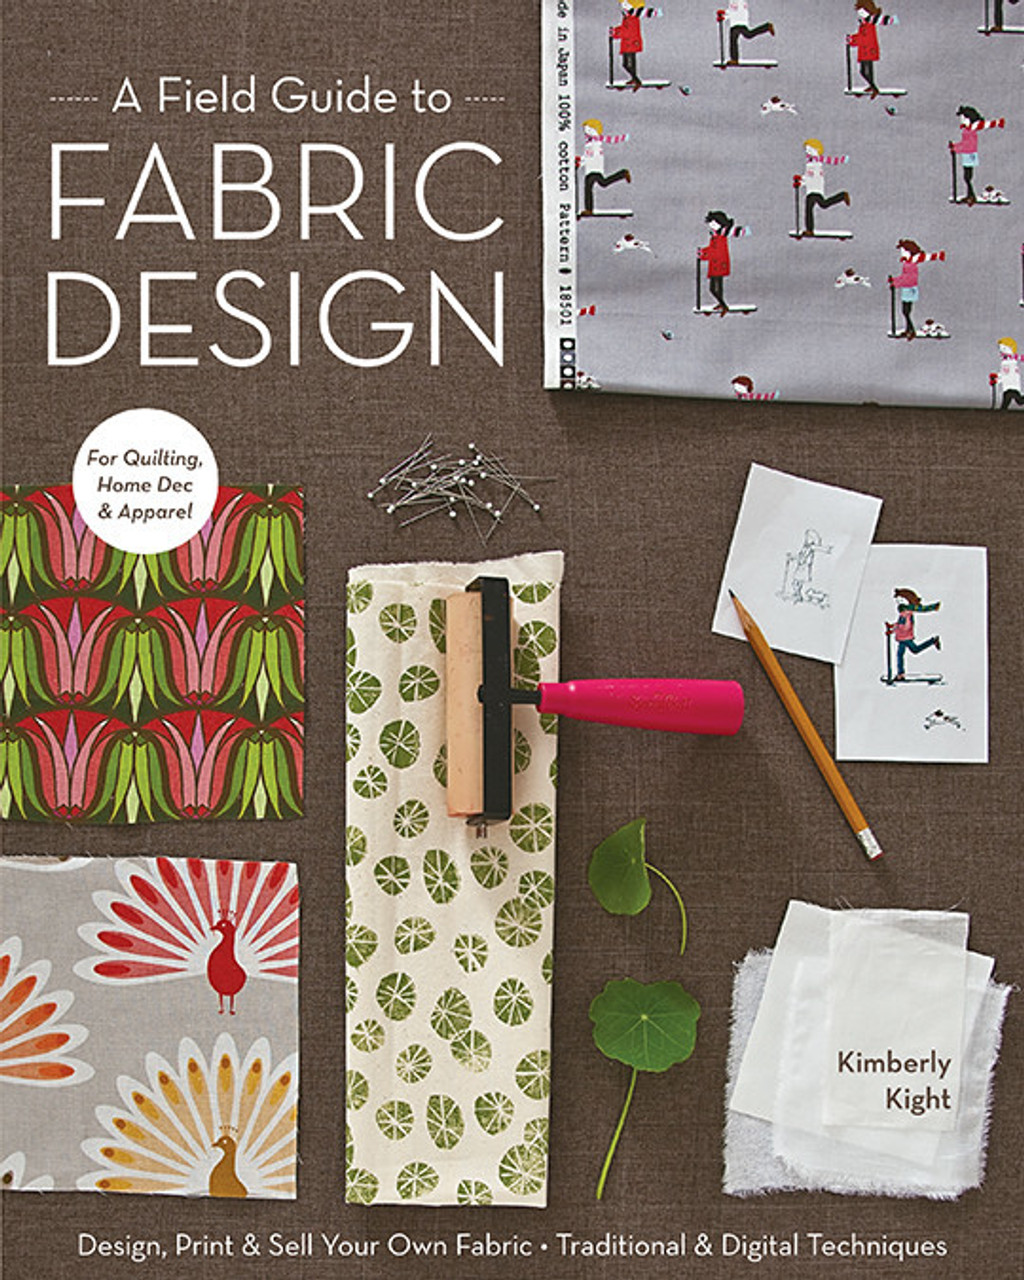 How to design your own fabric at home [FREE COURSE!]